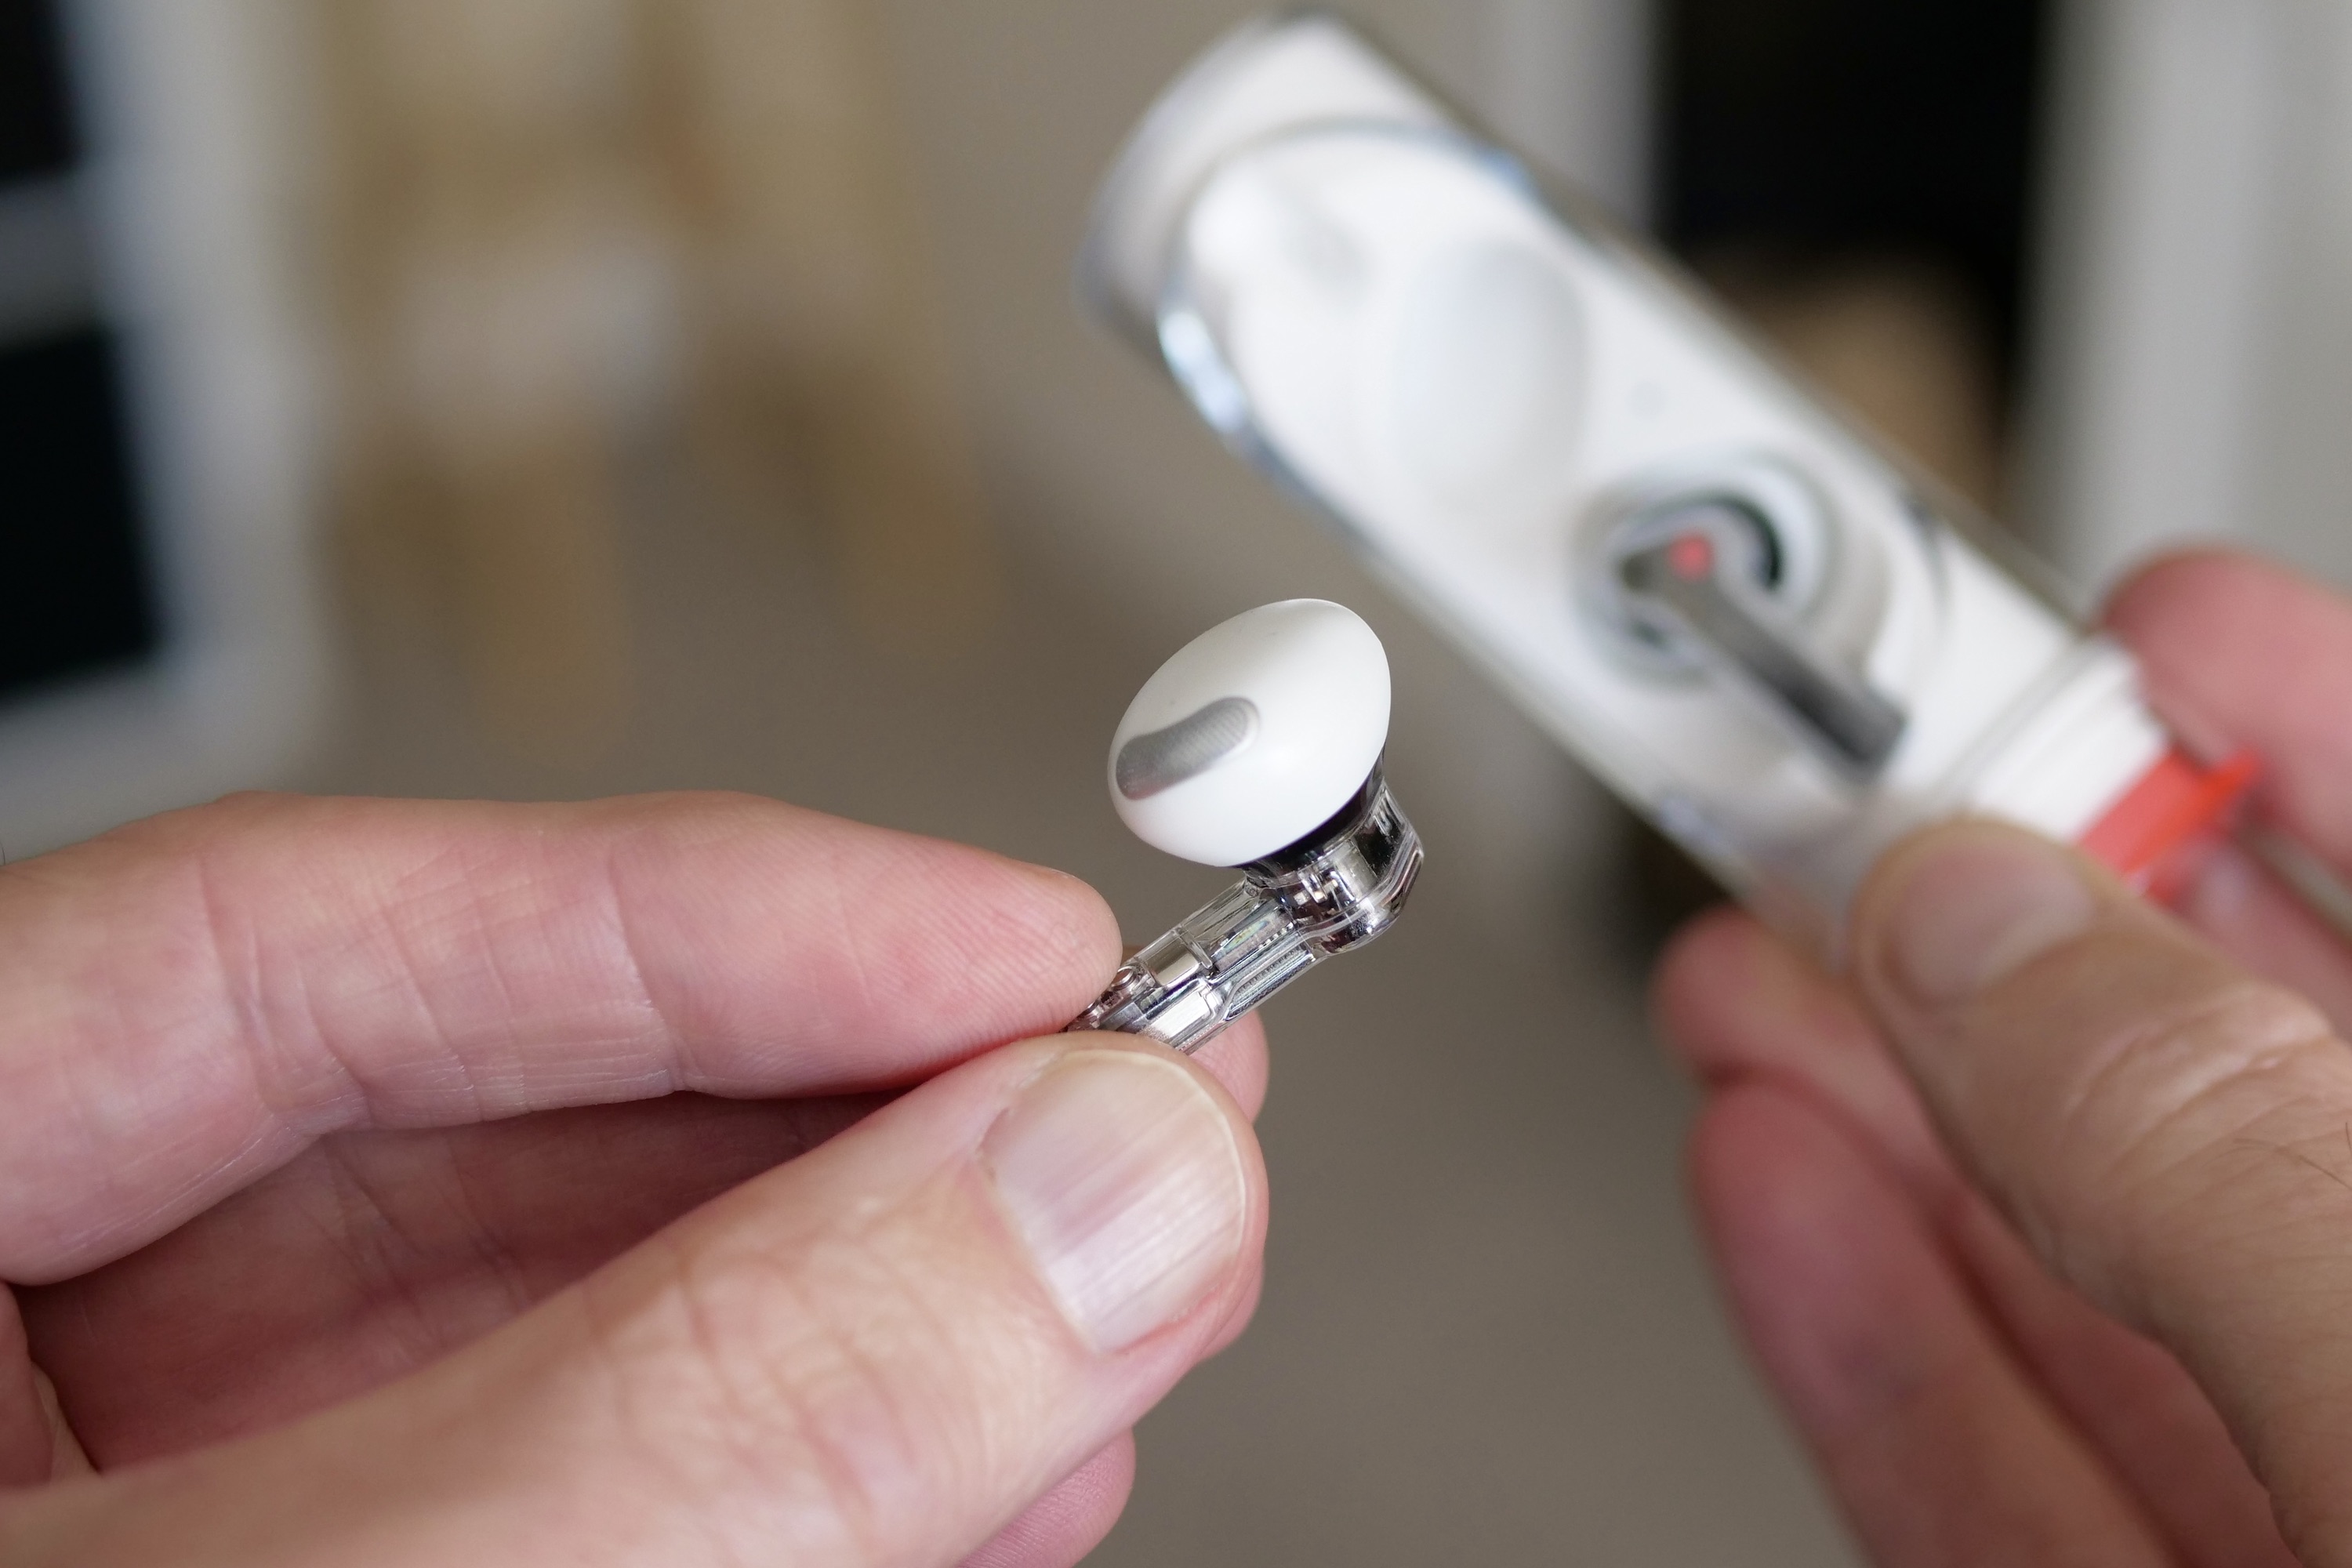 The Nothing Ear Stick's earbud, held between a person's finger.